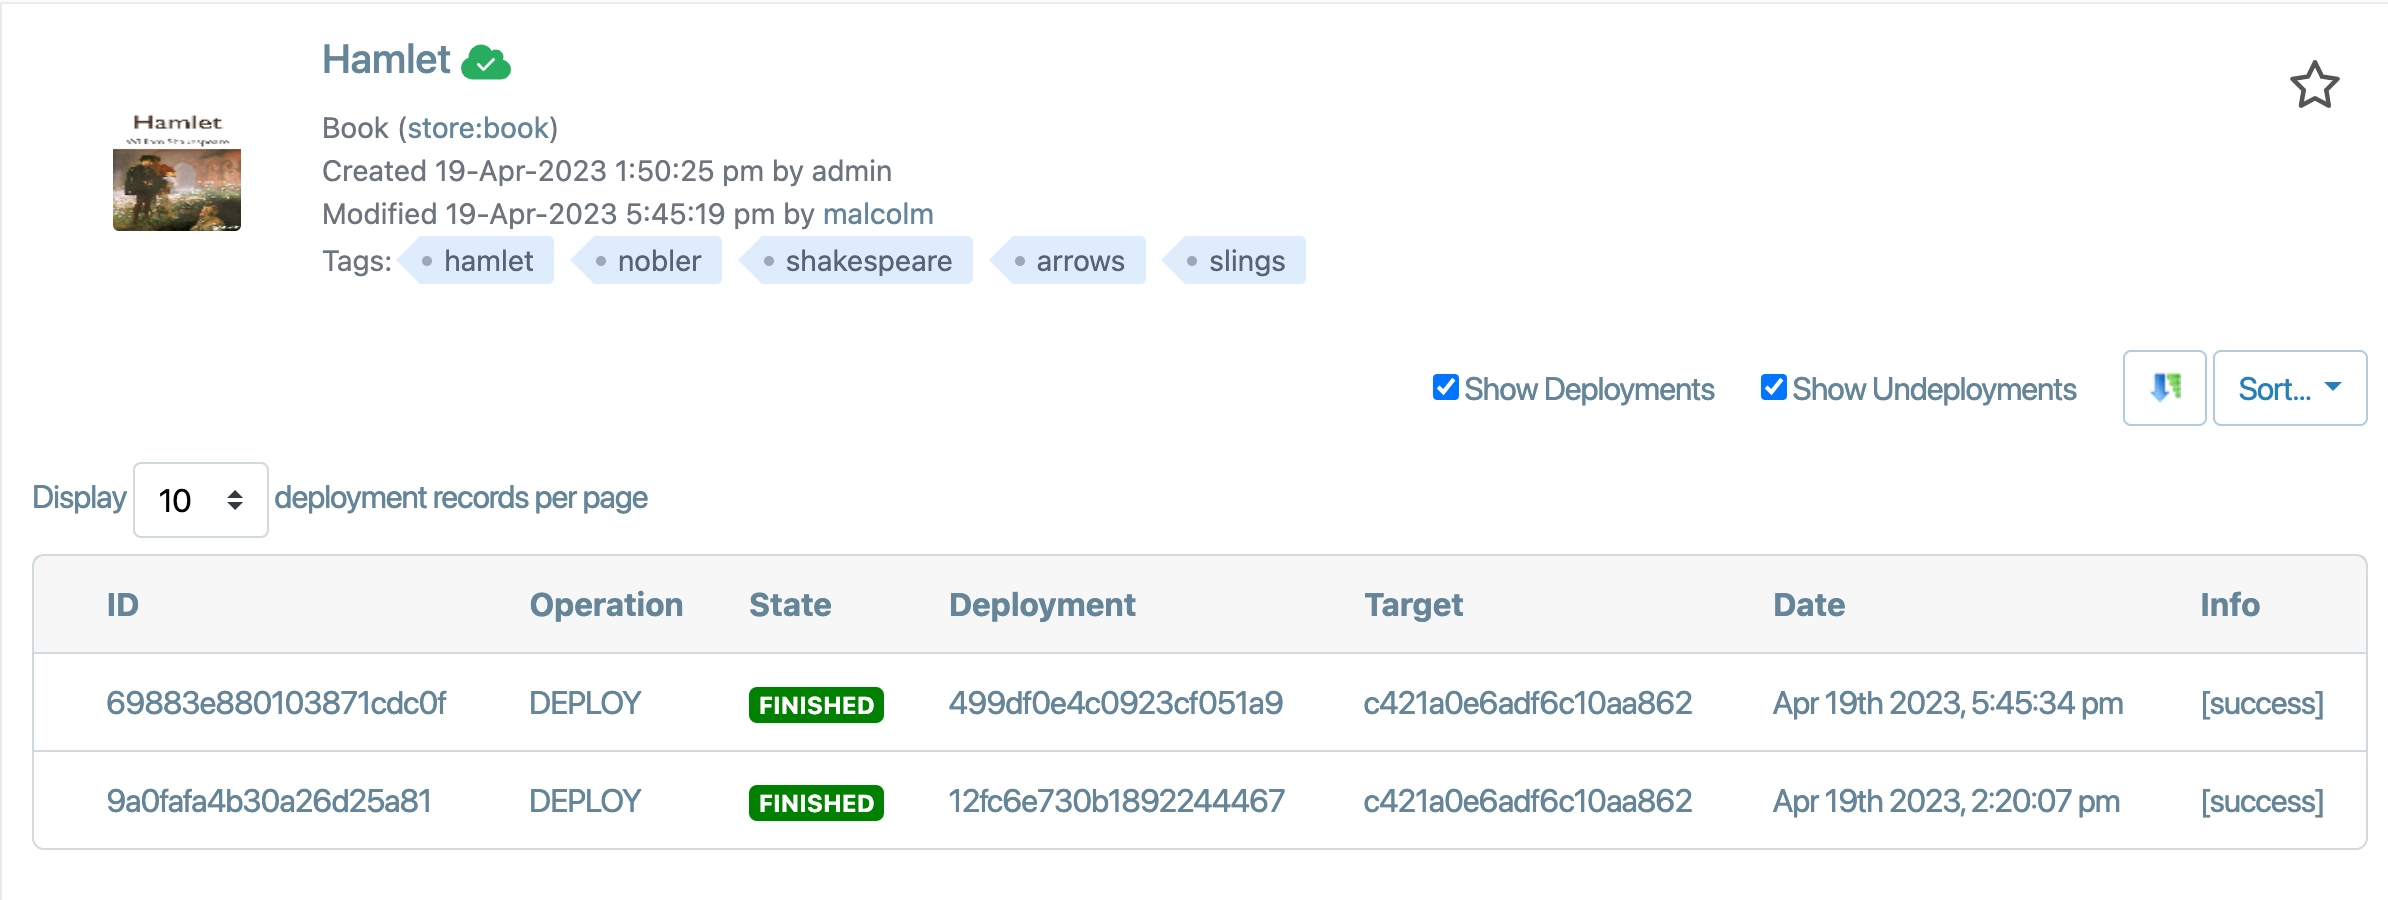 Deployment history and status